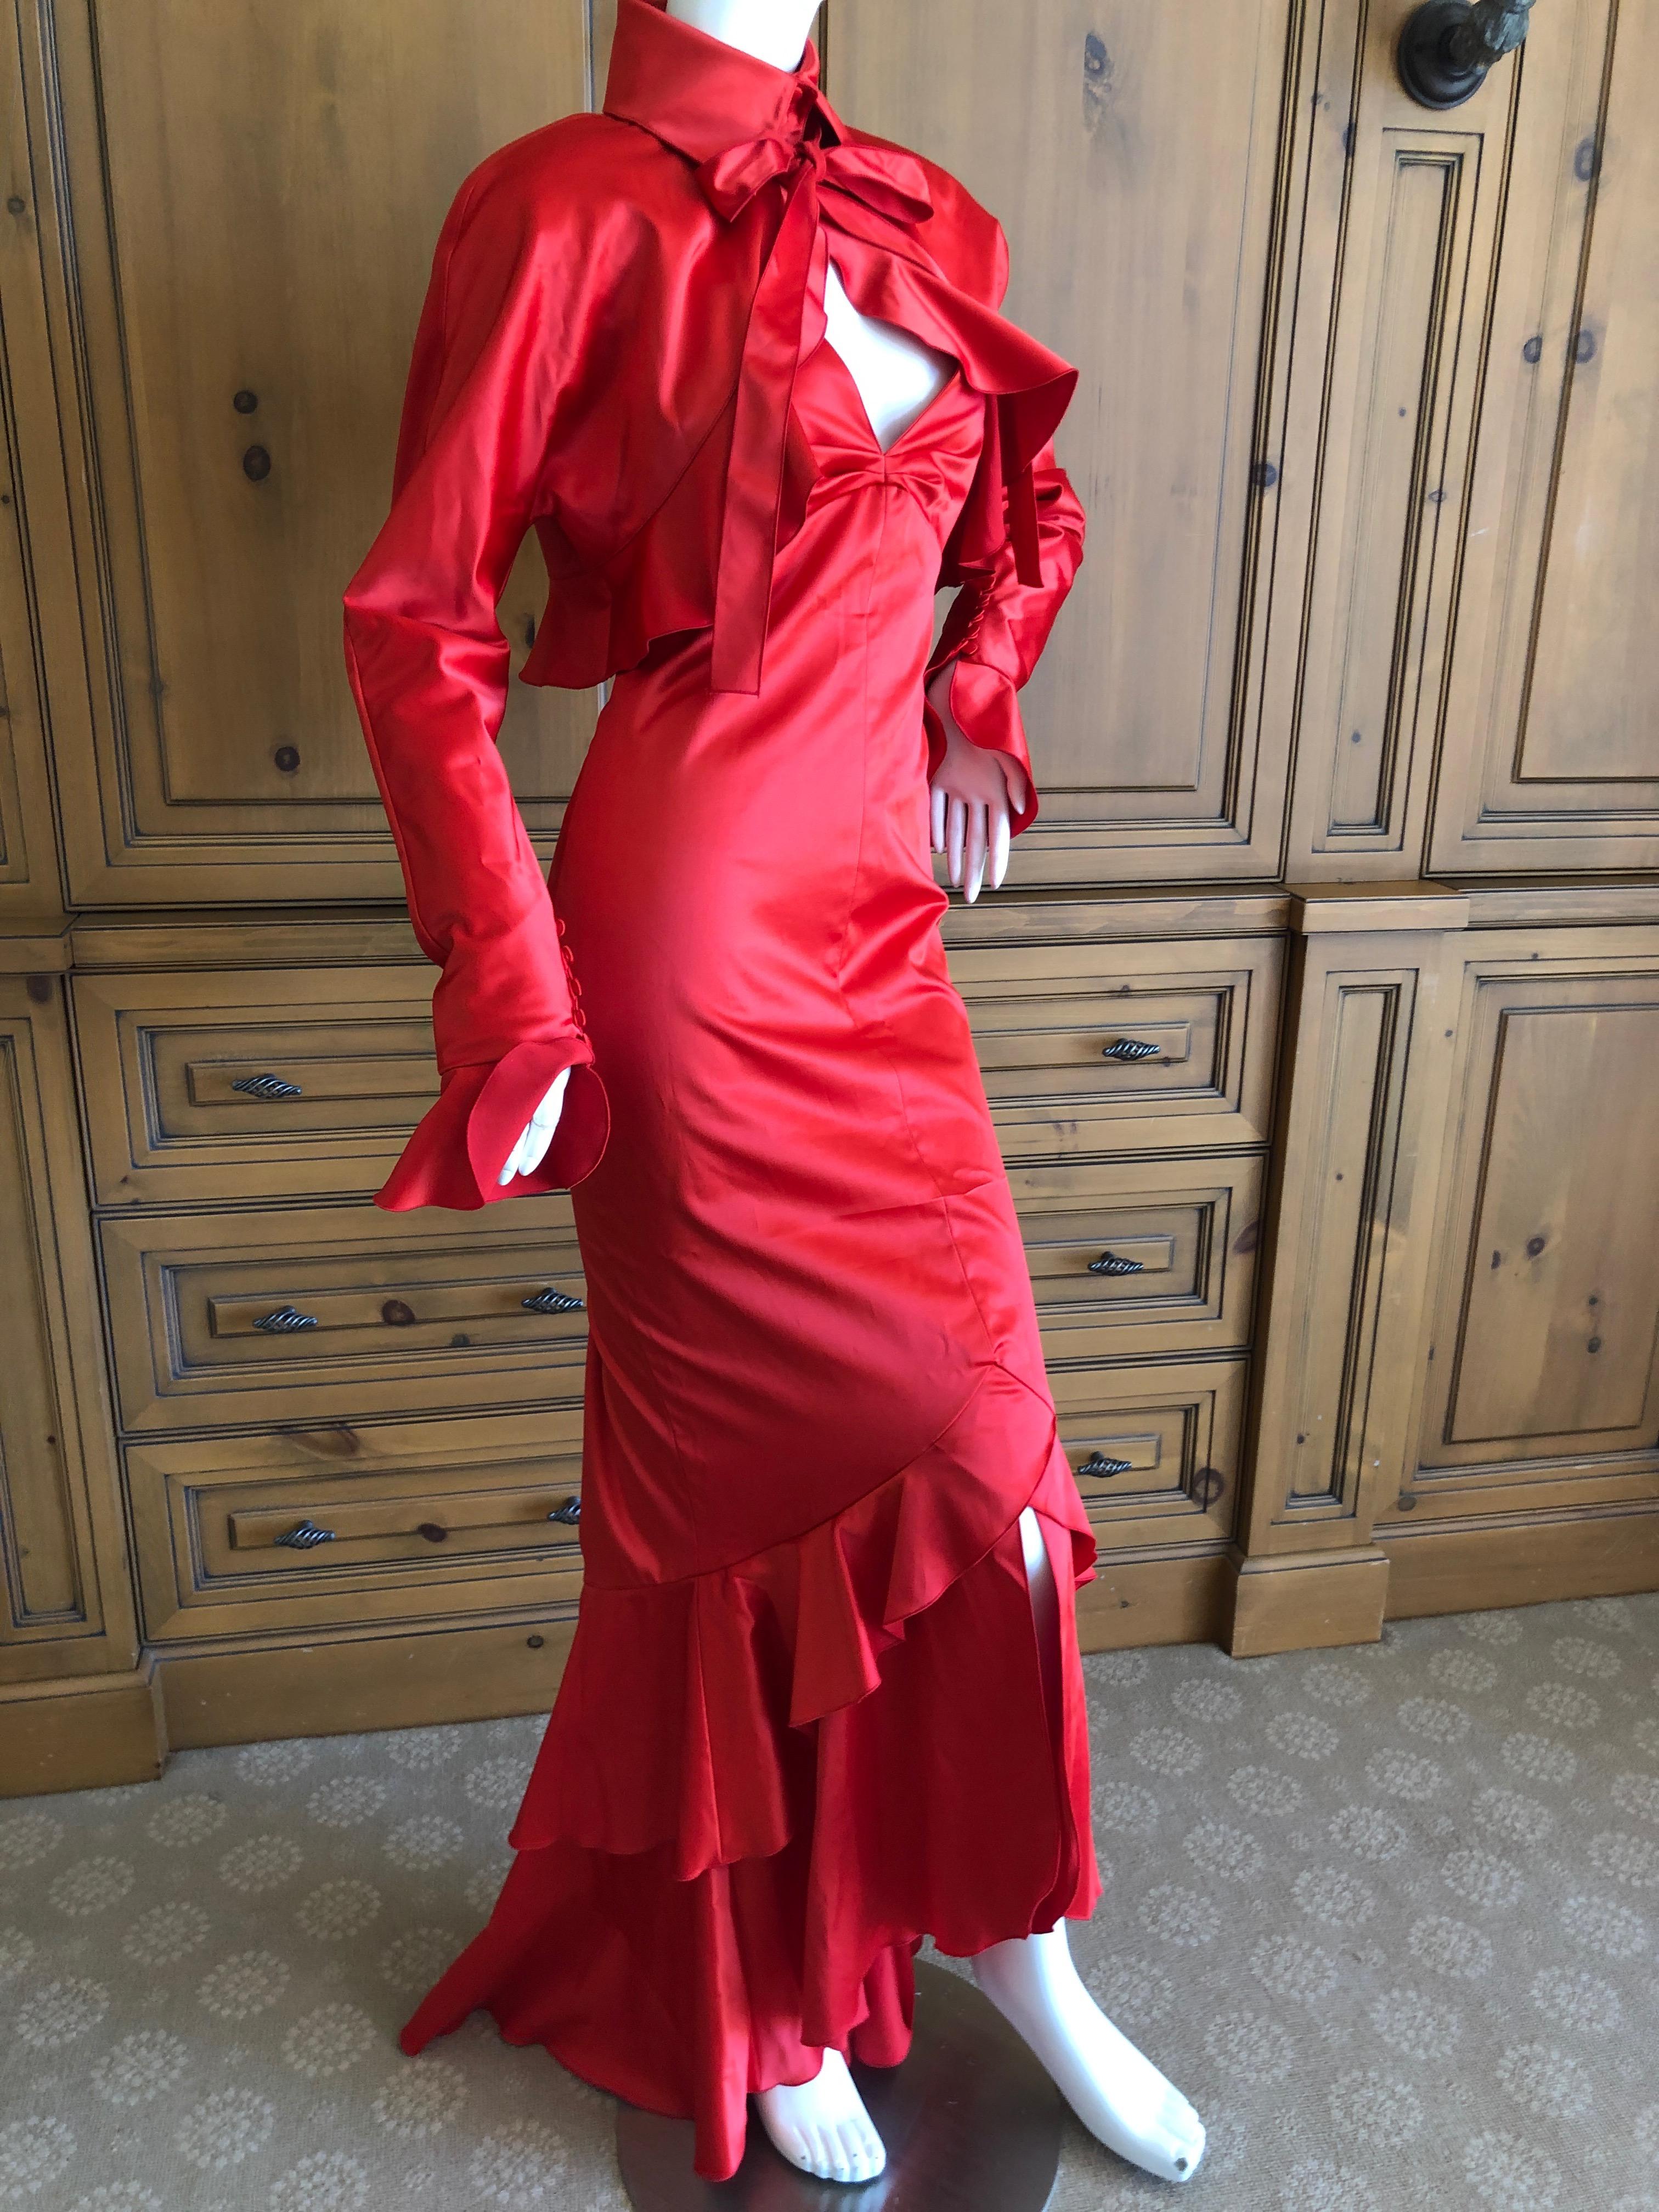 Karl Lagerfeld 1980's Red Evening Dress with Matching Jacket Lagerfeld Gallery 2